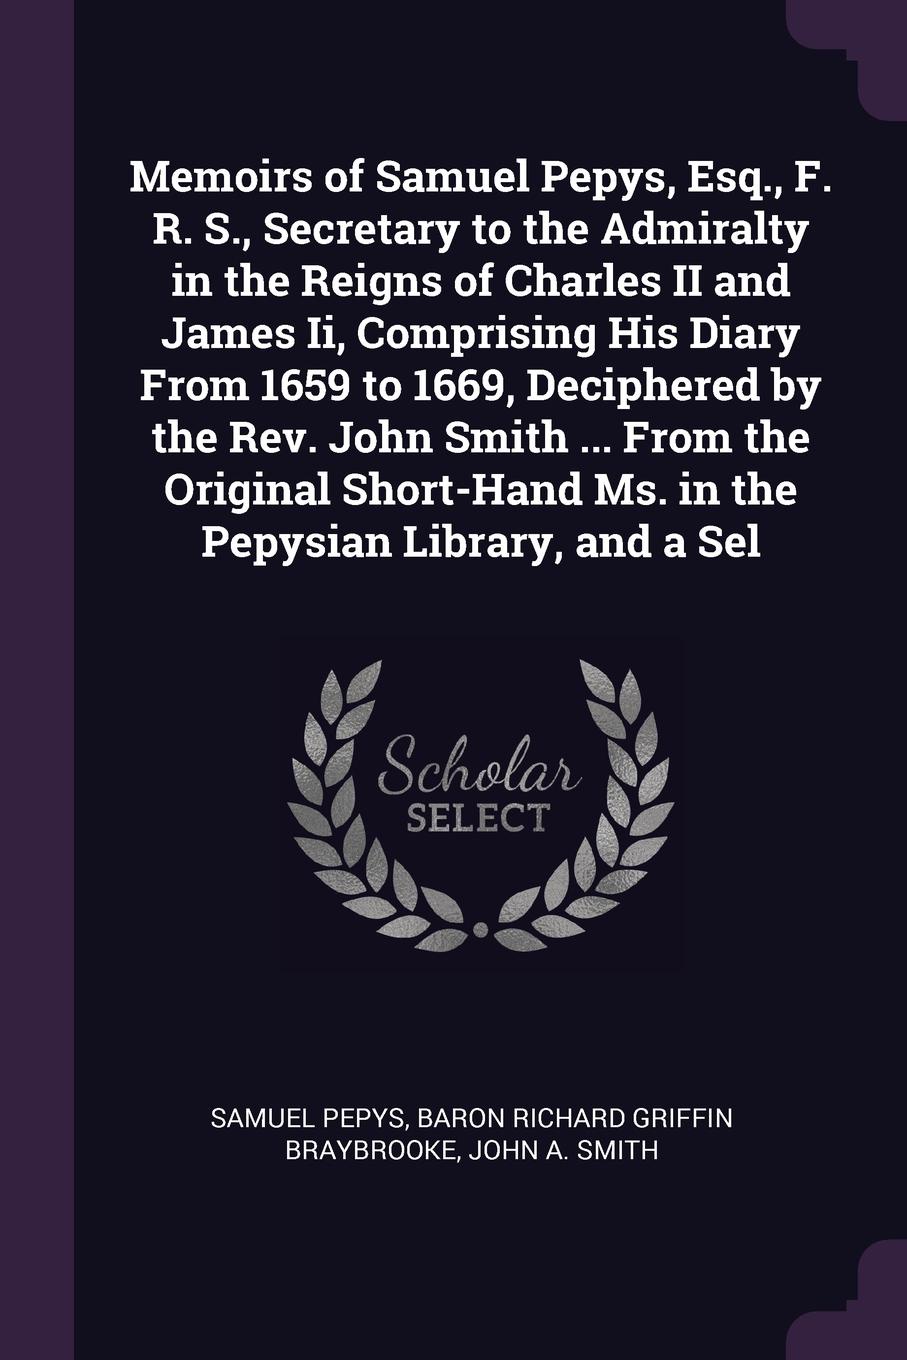 Memoirs of Samuel Pepys, Esq., F. R. S., Secretary to the Admiralty in the Reigns of Charles II and James Ii, Comprising His Diary From 1659 to 1669, Deciphered by the Rev. John Smith ... From the Original Short-Hand Ms. in the Pepysian Library, a...